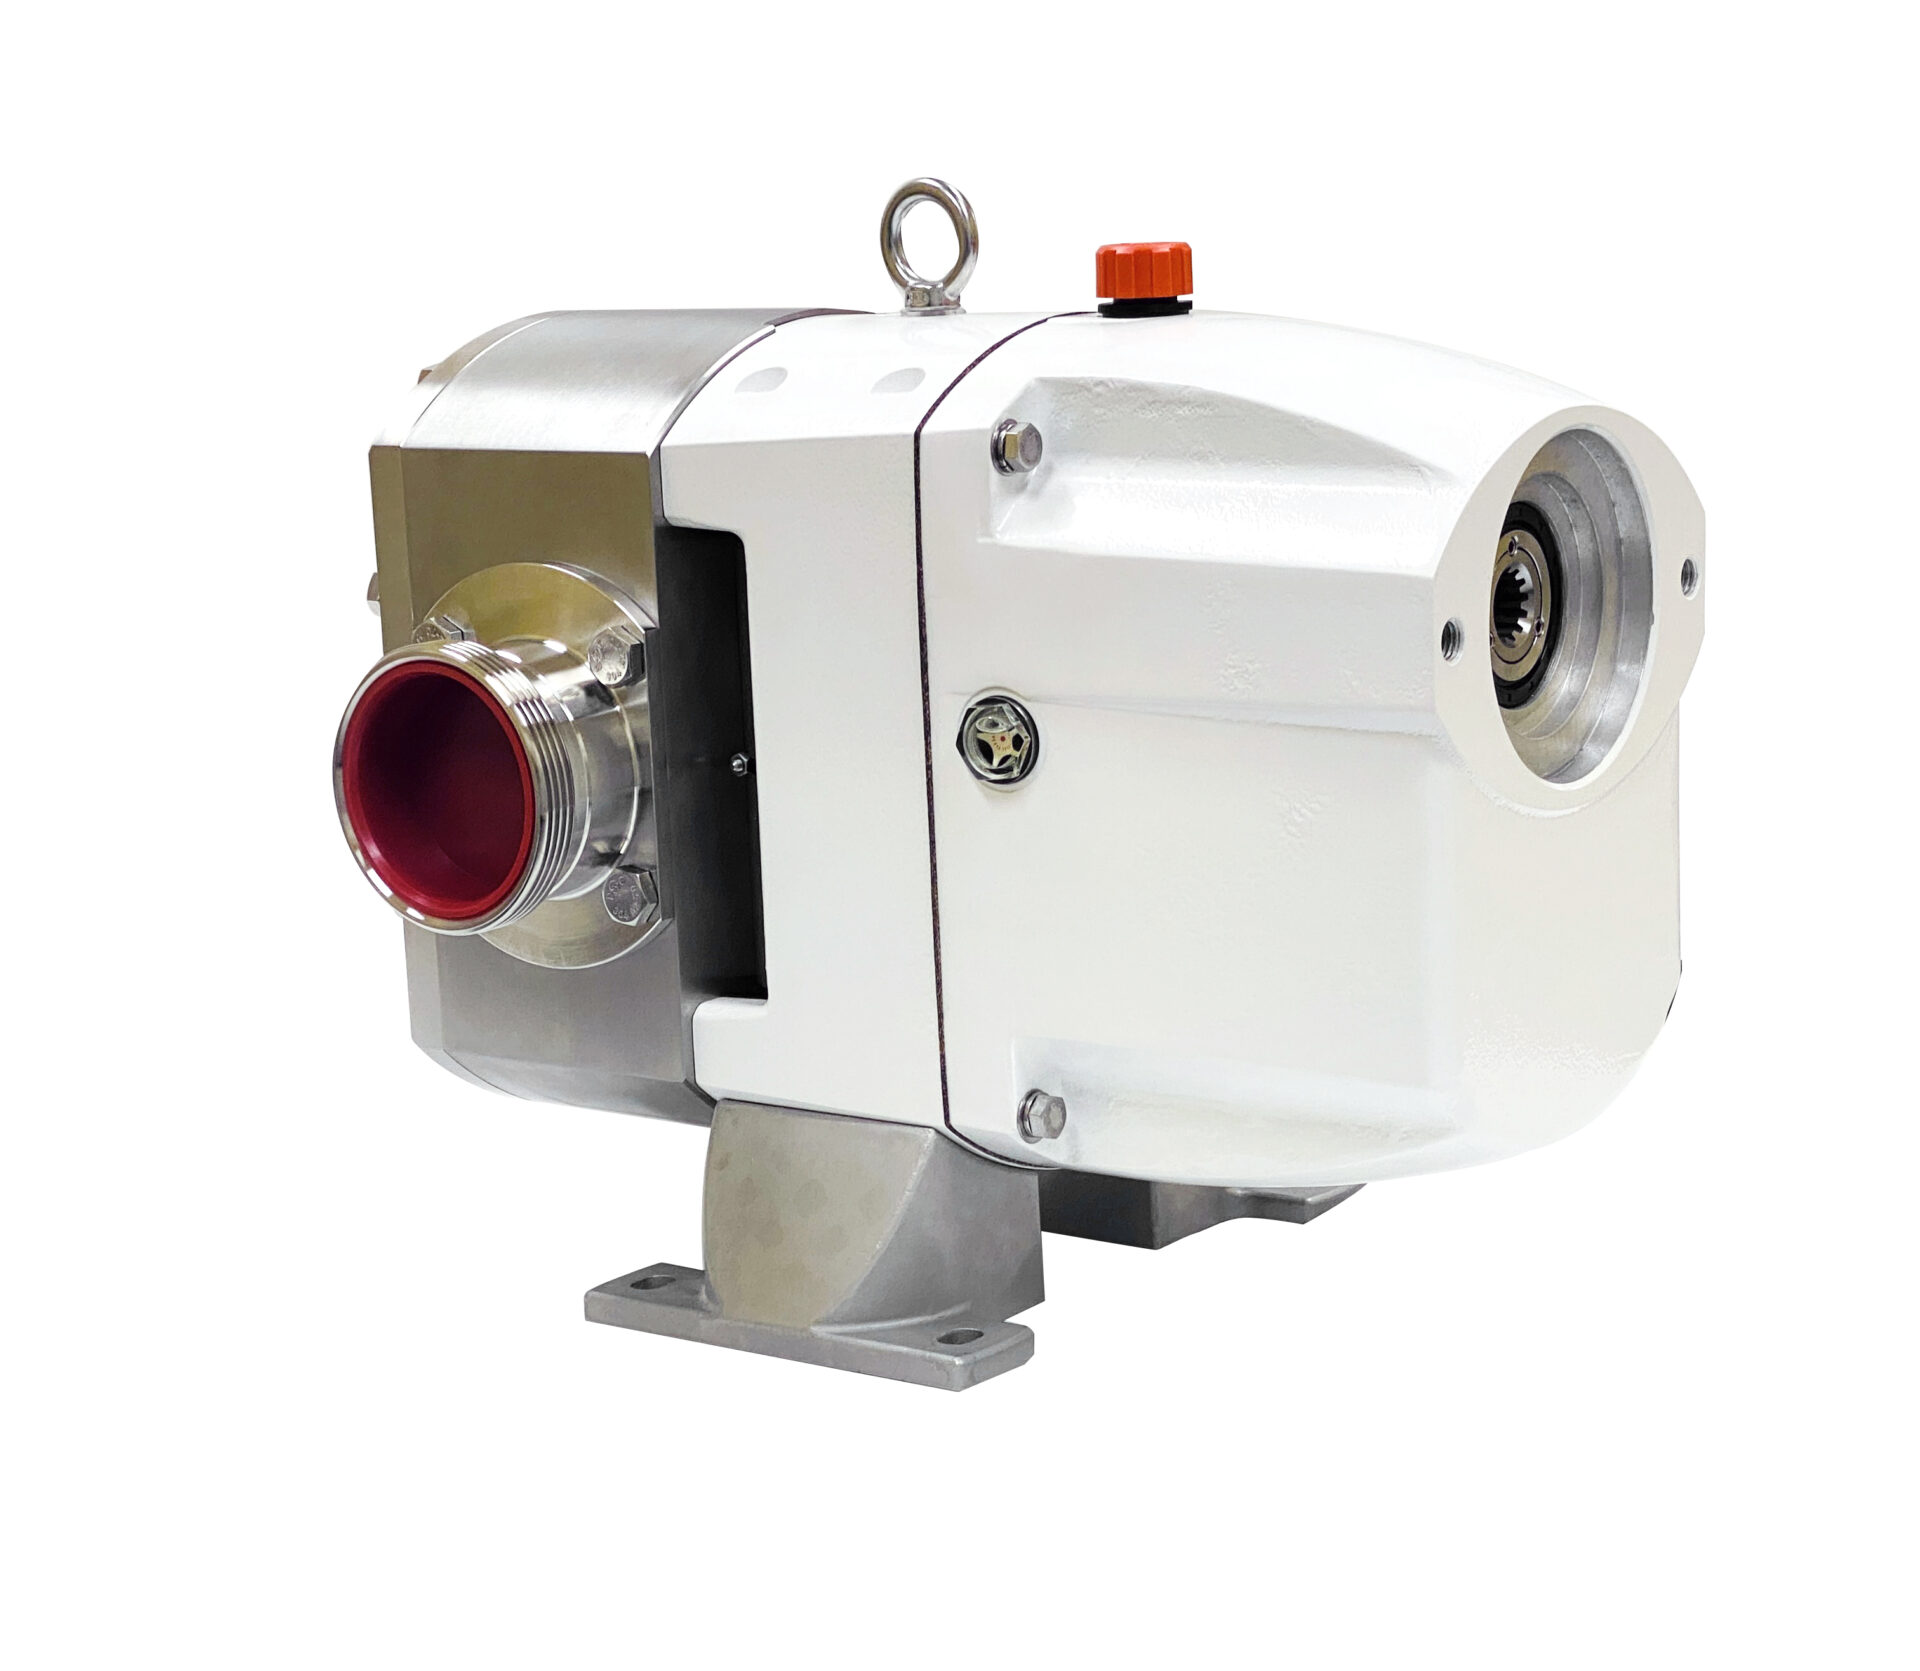 Packo Introduces the LT Rotary Lobe Pump for Drive With a Hydraulic Motor